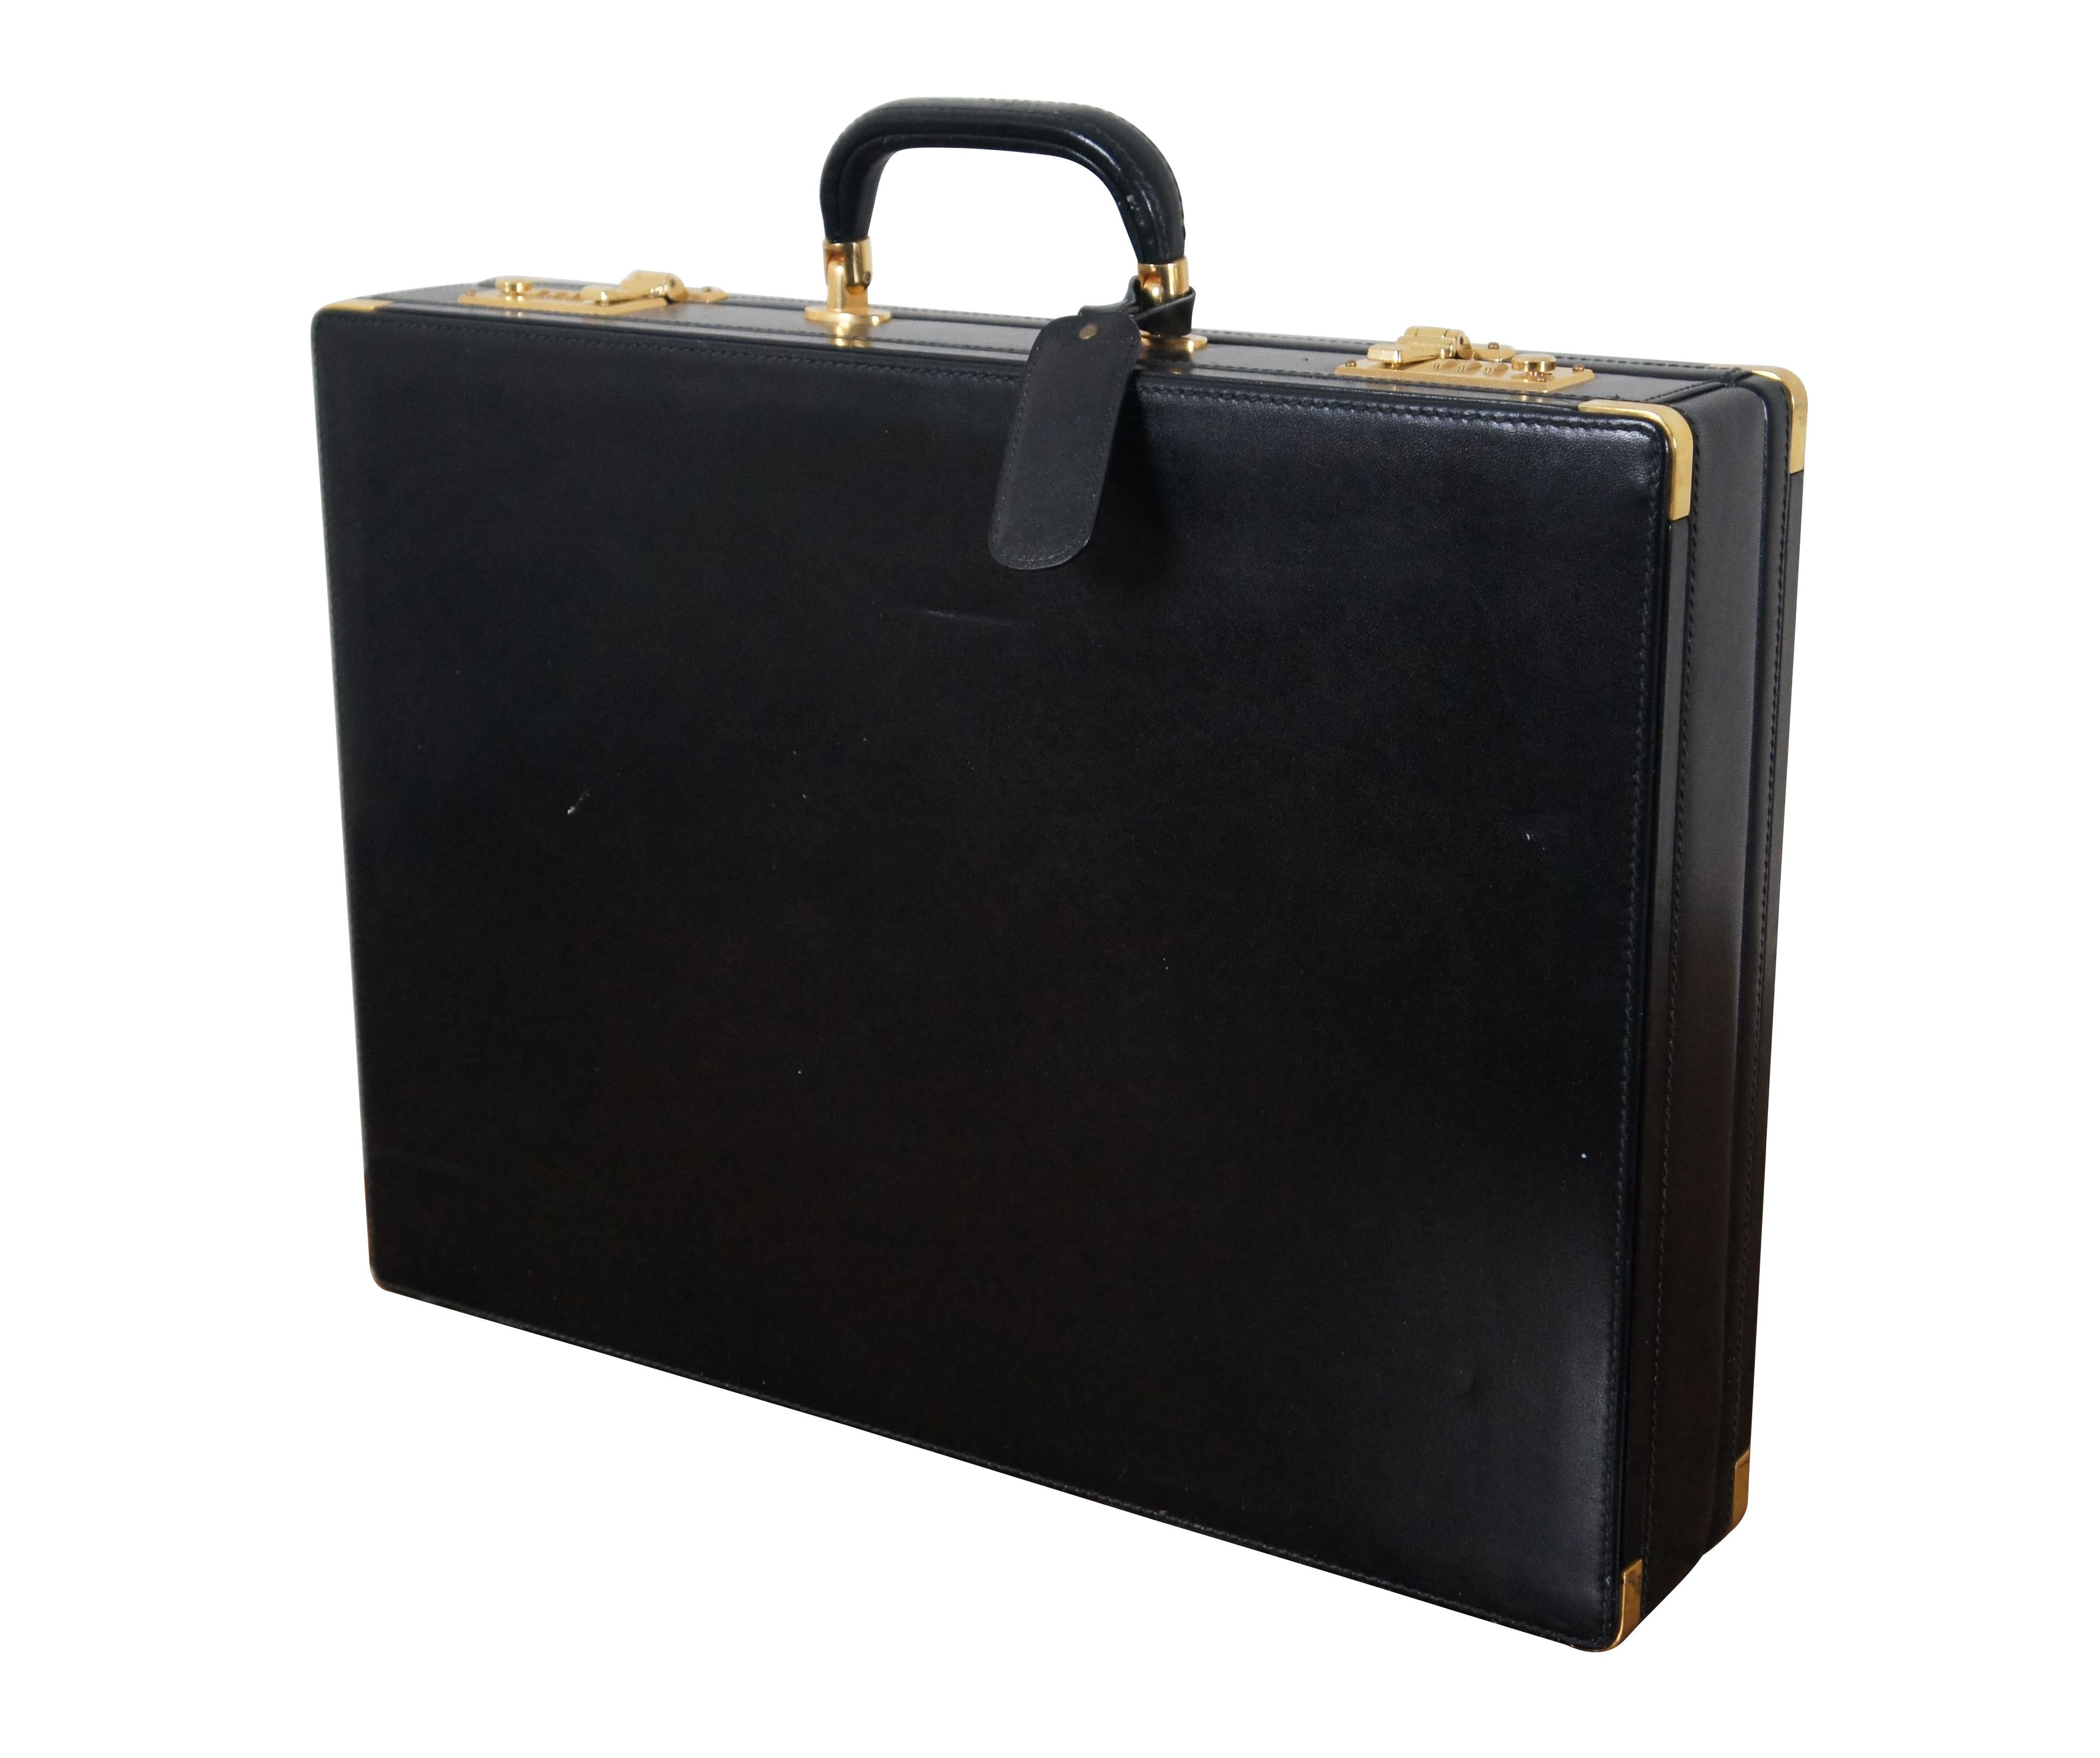 Vintage Bally black leather briefcase. Features single handle, brass feet, capped corners, and double latches with combination locks (currently set at default 000). Interior features beige suede lining, small slip pocket with removable ID card